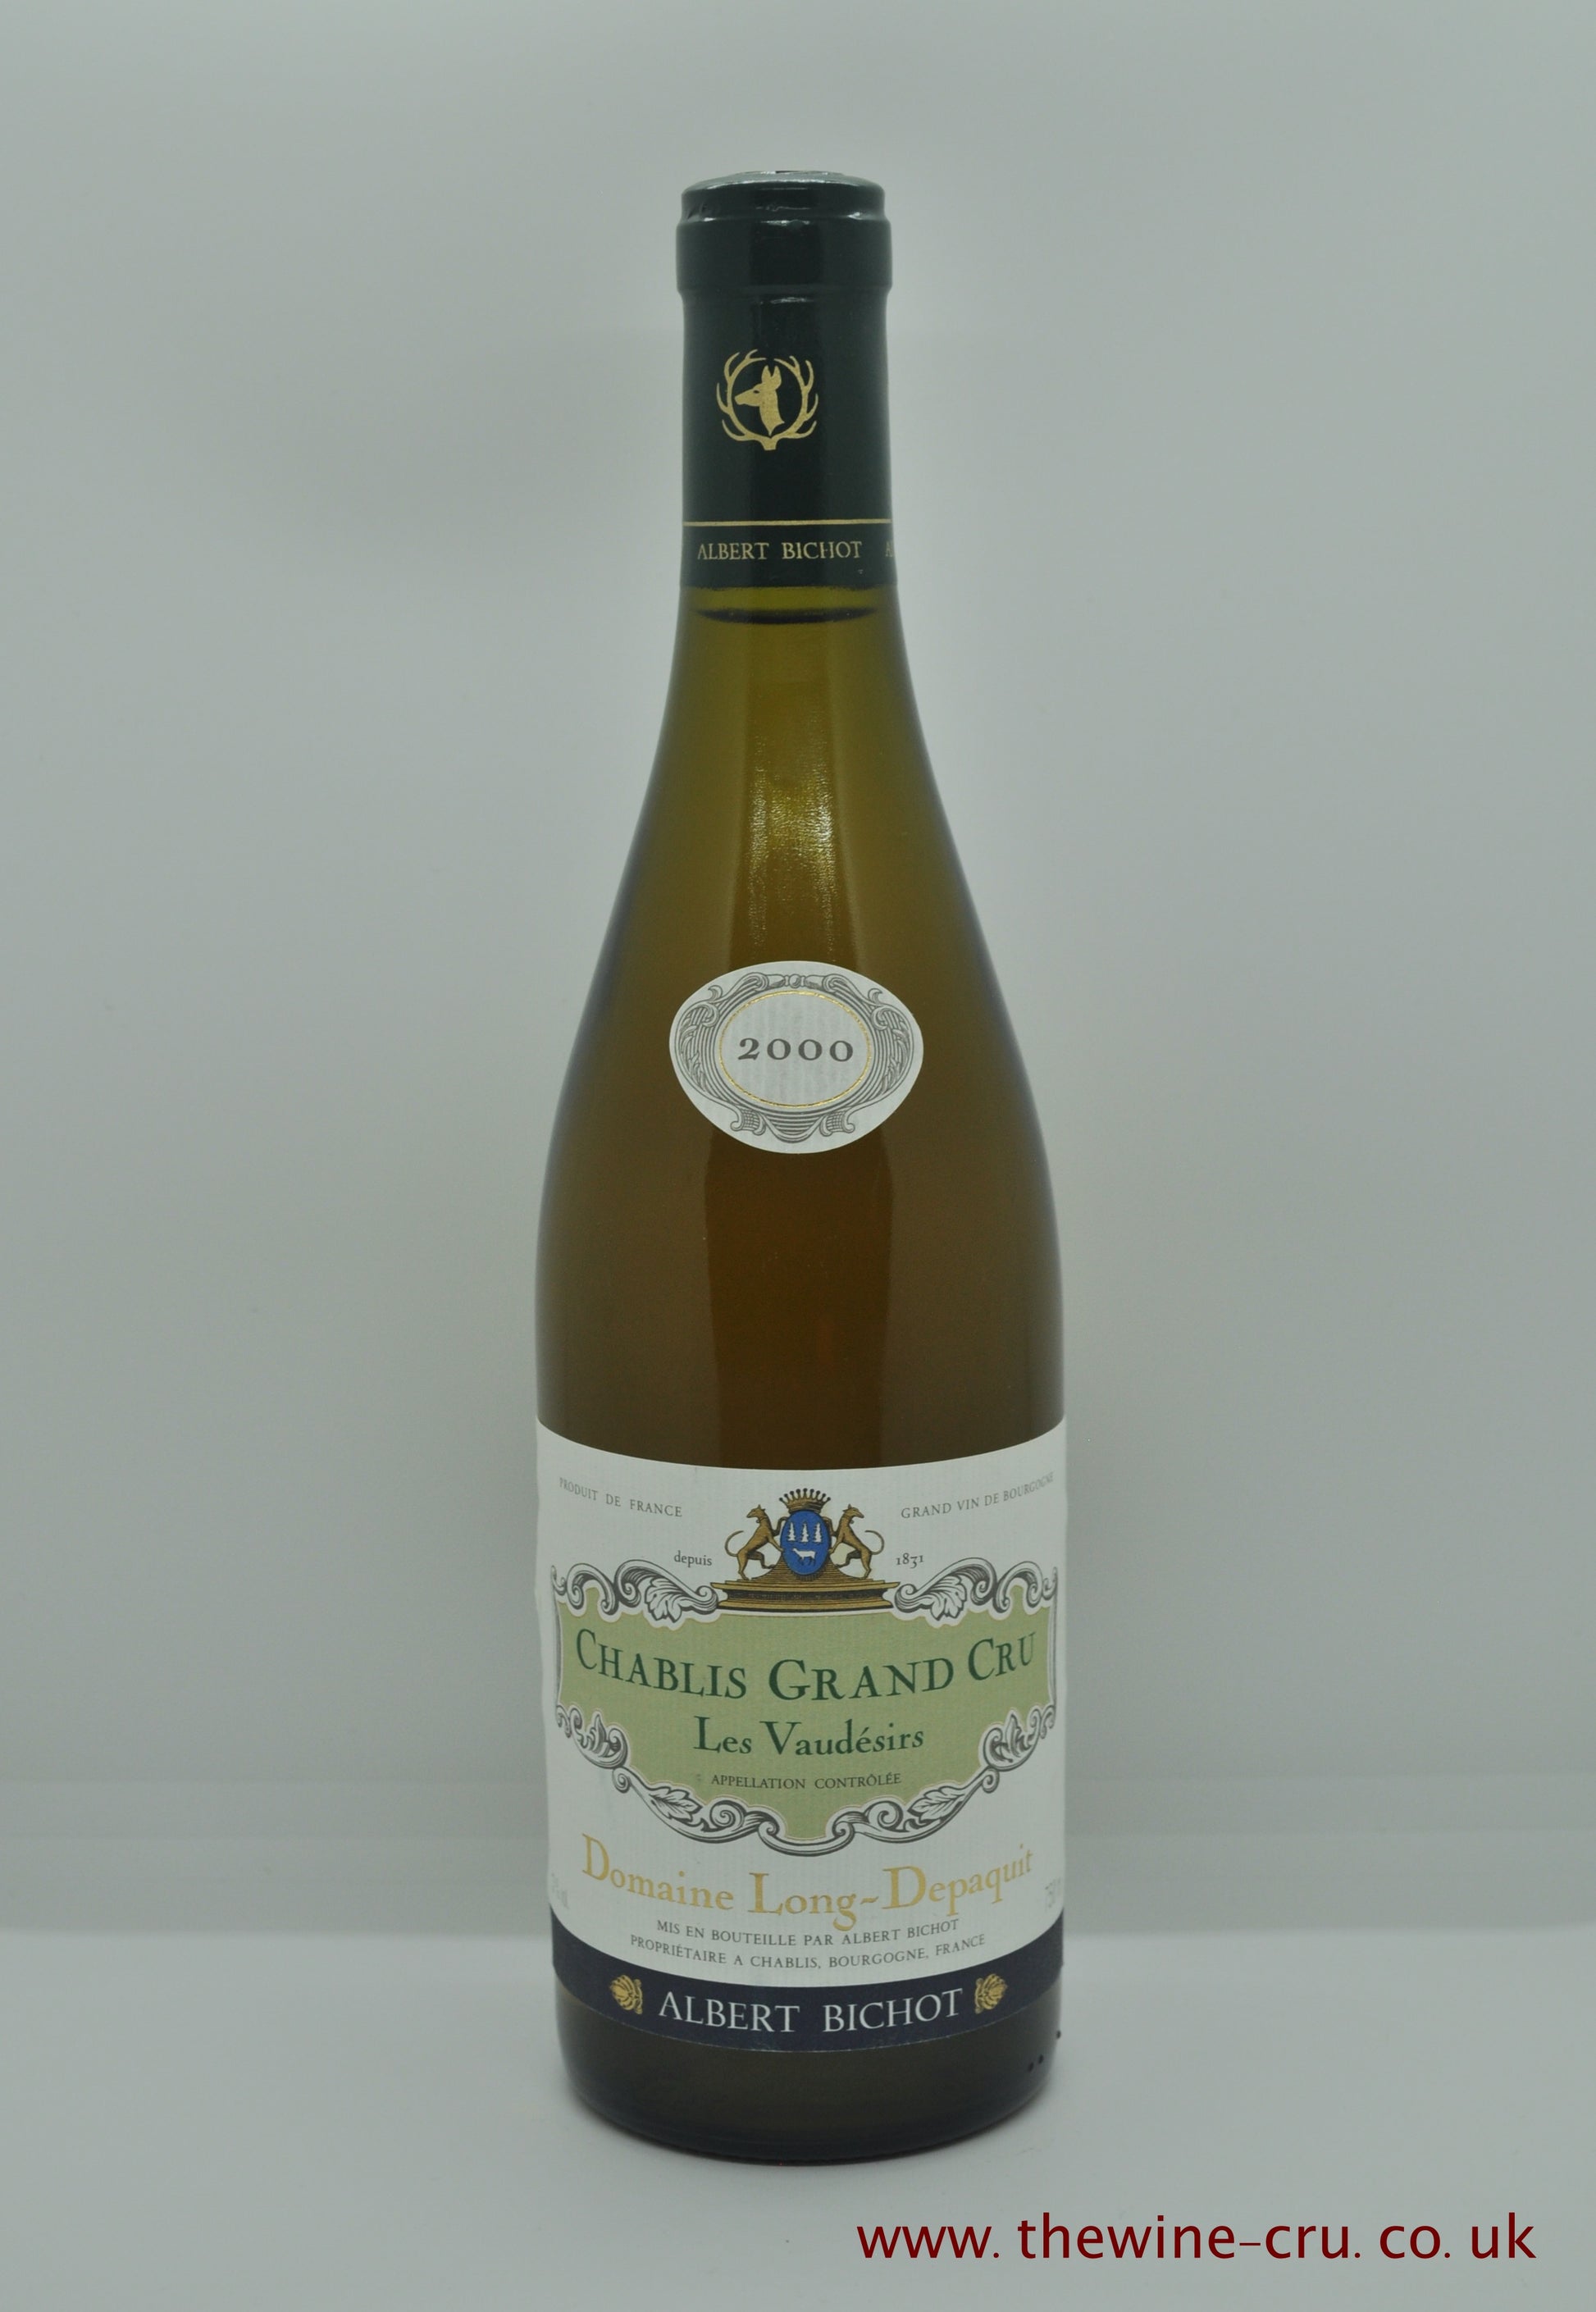 2000 vintage white wine. Chablis Grand Cru Les Vaudesirs, Domaine Long-Depaquit 2000. France. Immediate delivery UK. Free local delivery.